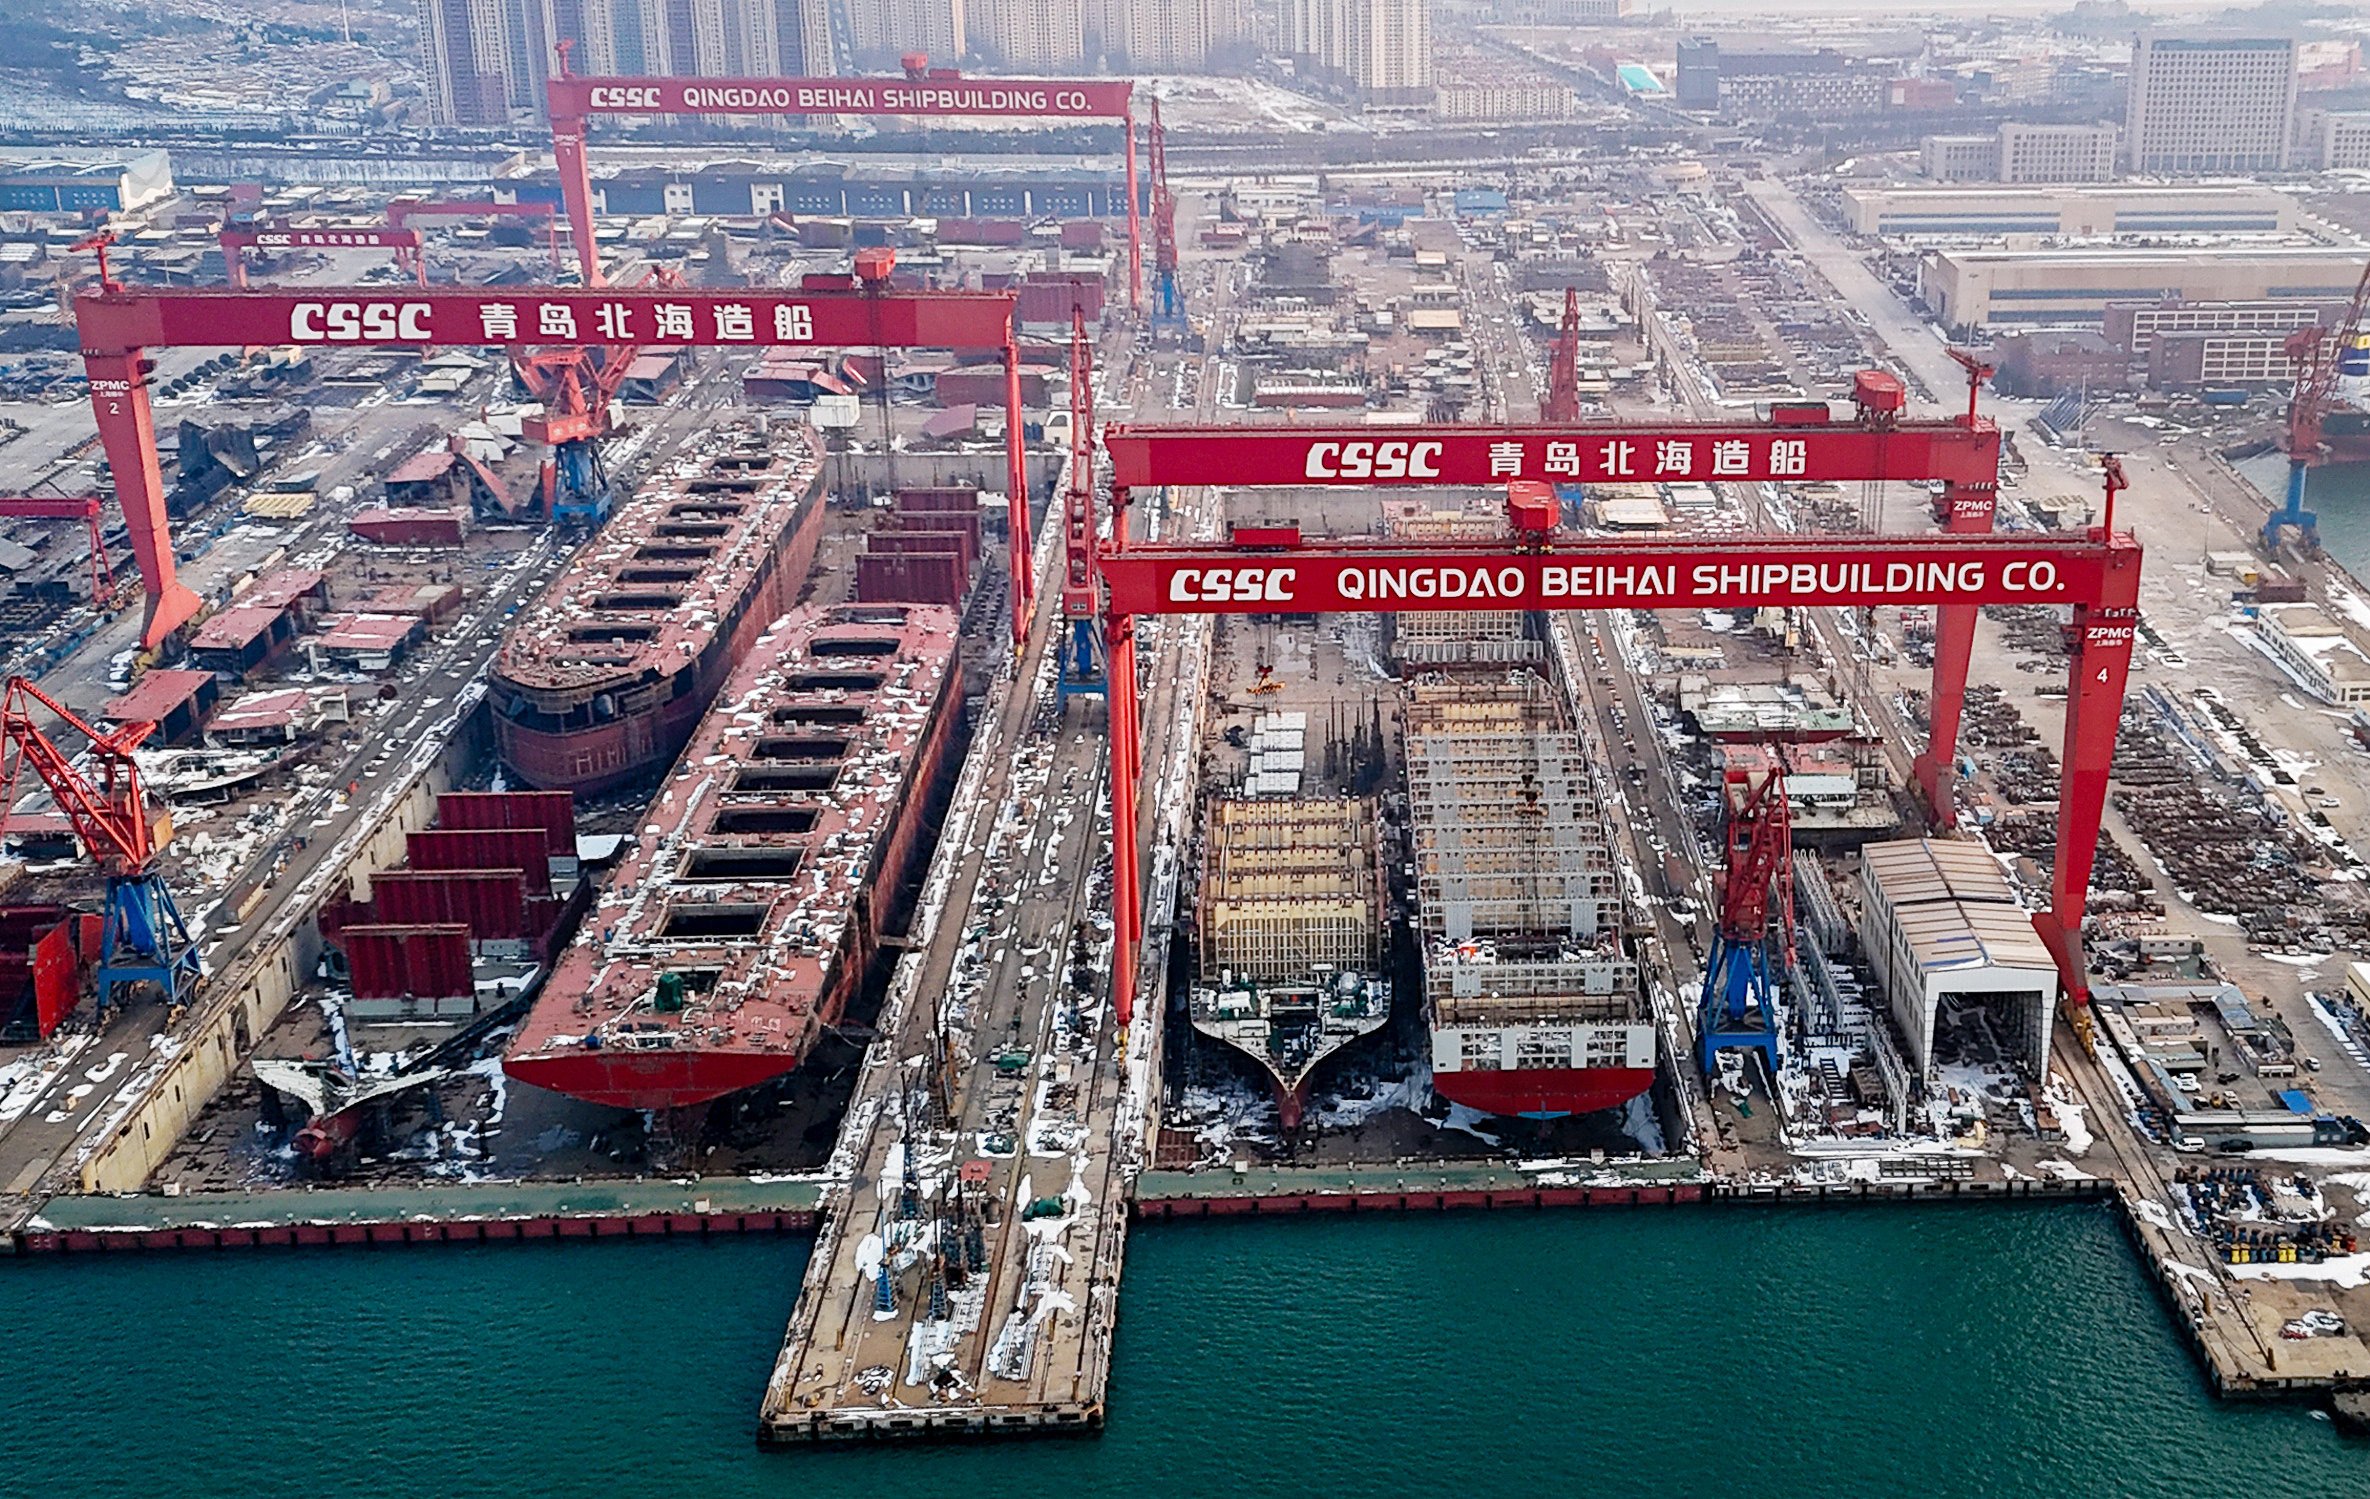 A study has found that China’s shipyards are achieving rapid growth despite US sanctions, thanks to technological progress and a complete industrial chain. Photo: Getty Images